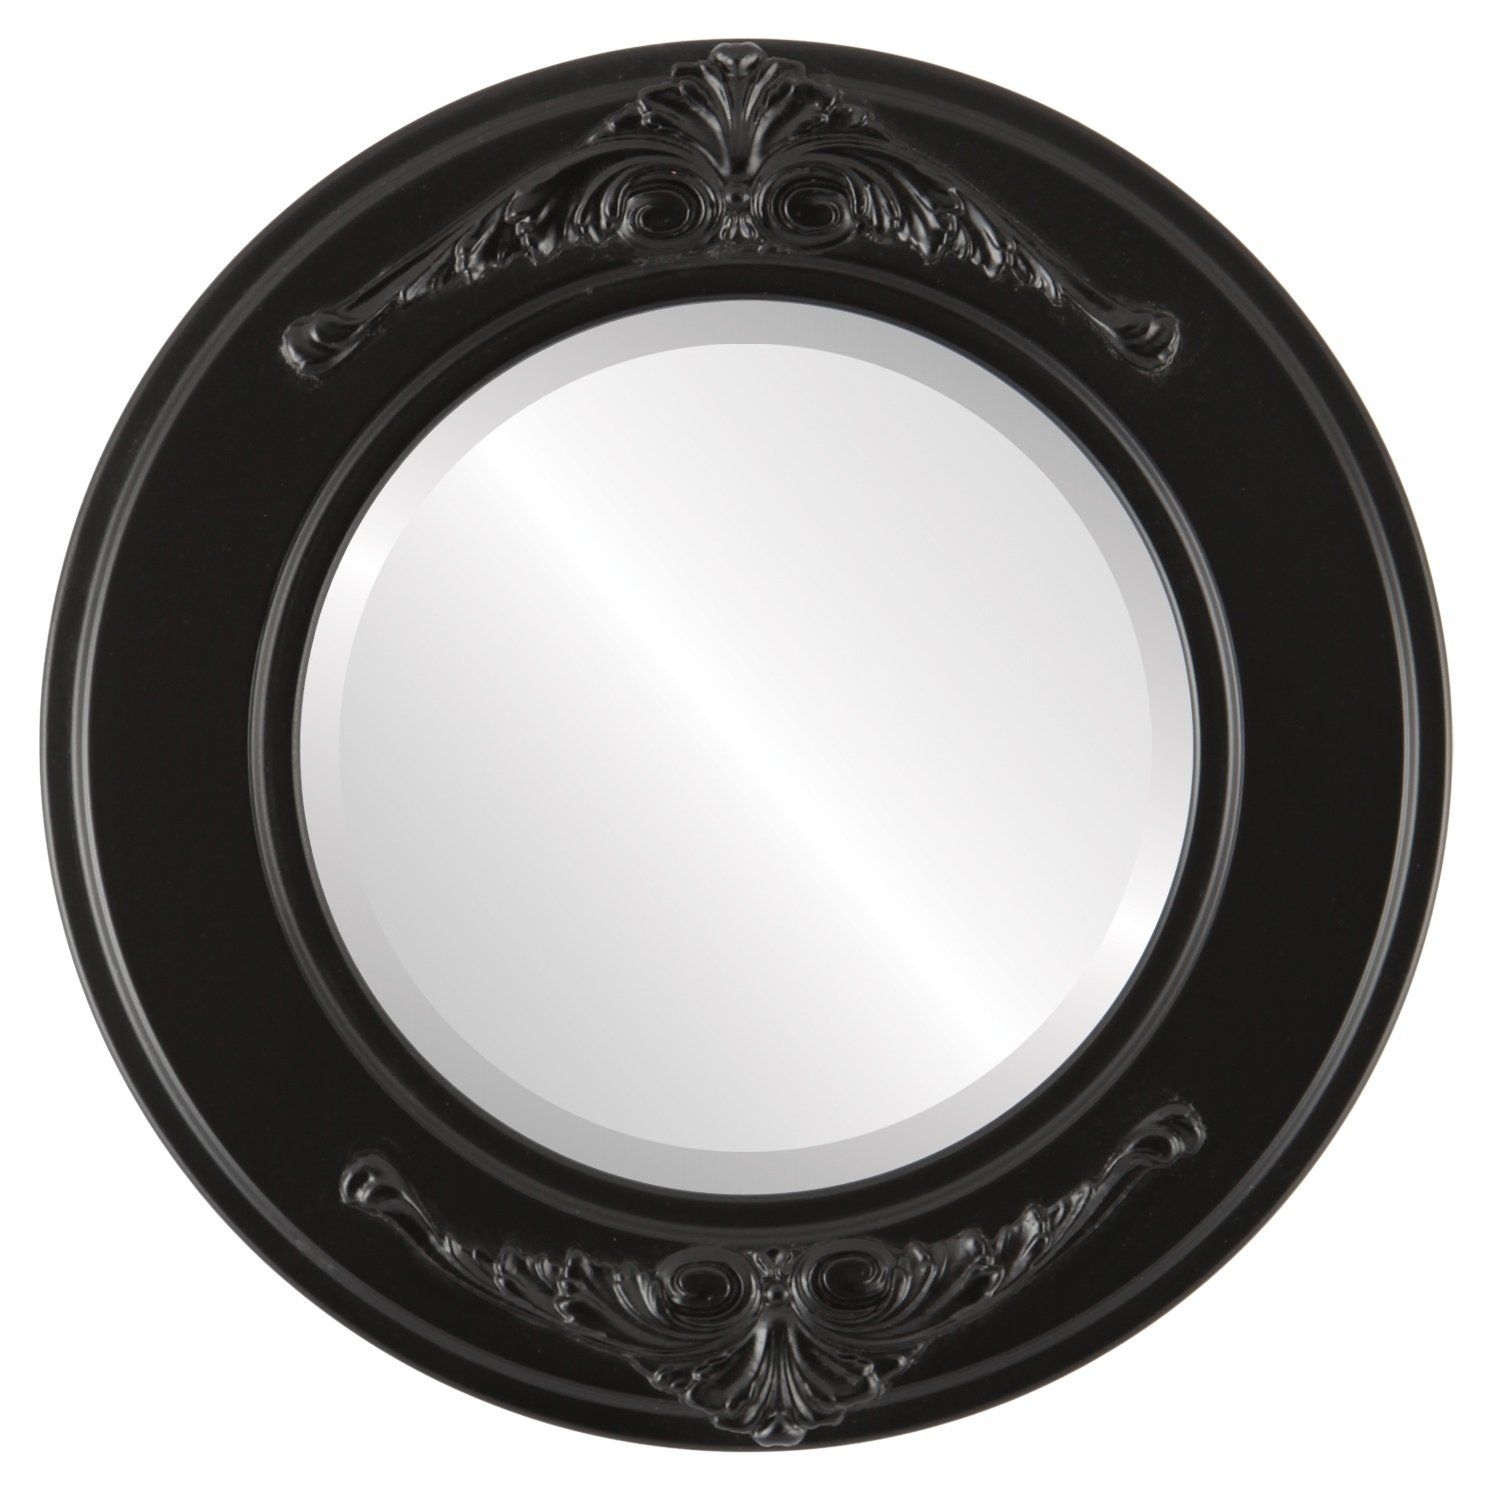 Ramino Framed Round Mirror In Matte Black (19x19) In 2020 | Round Pertaining To Matte Black Metal Wall Mirrors (View 11 of 15)